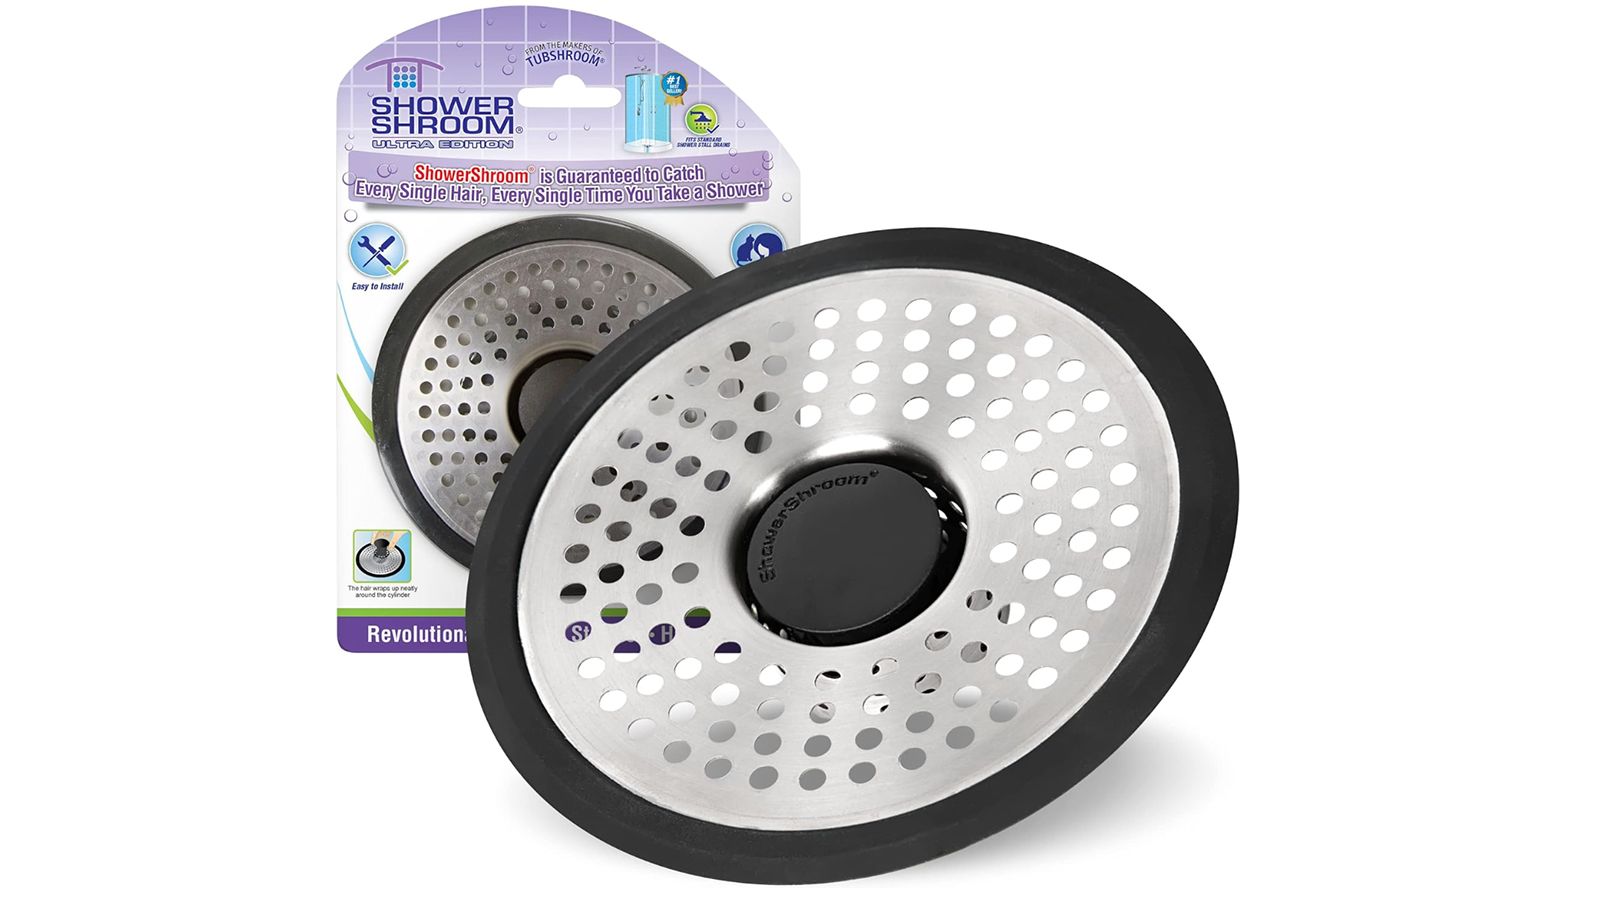 This $9 Shower Drain Cover Prevents Hair Clogs Once and for All